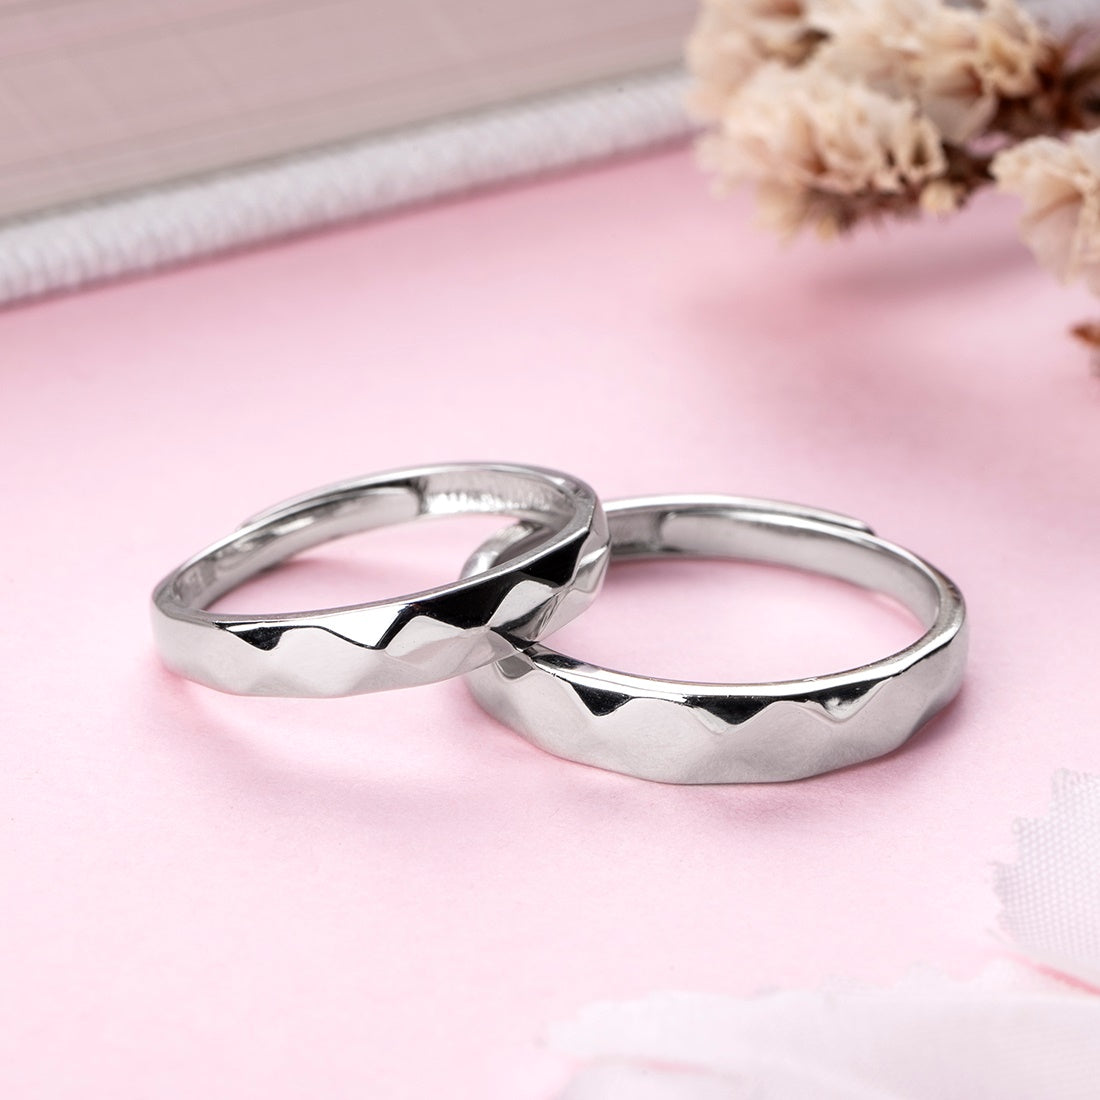 Majestic Lovers Rhodium Plated 925 Sterling Silver Couple Rings (Adjustable)